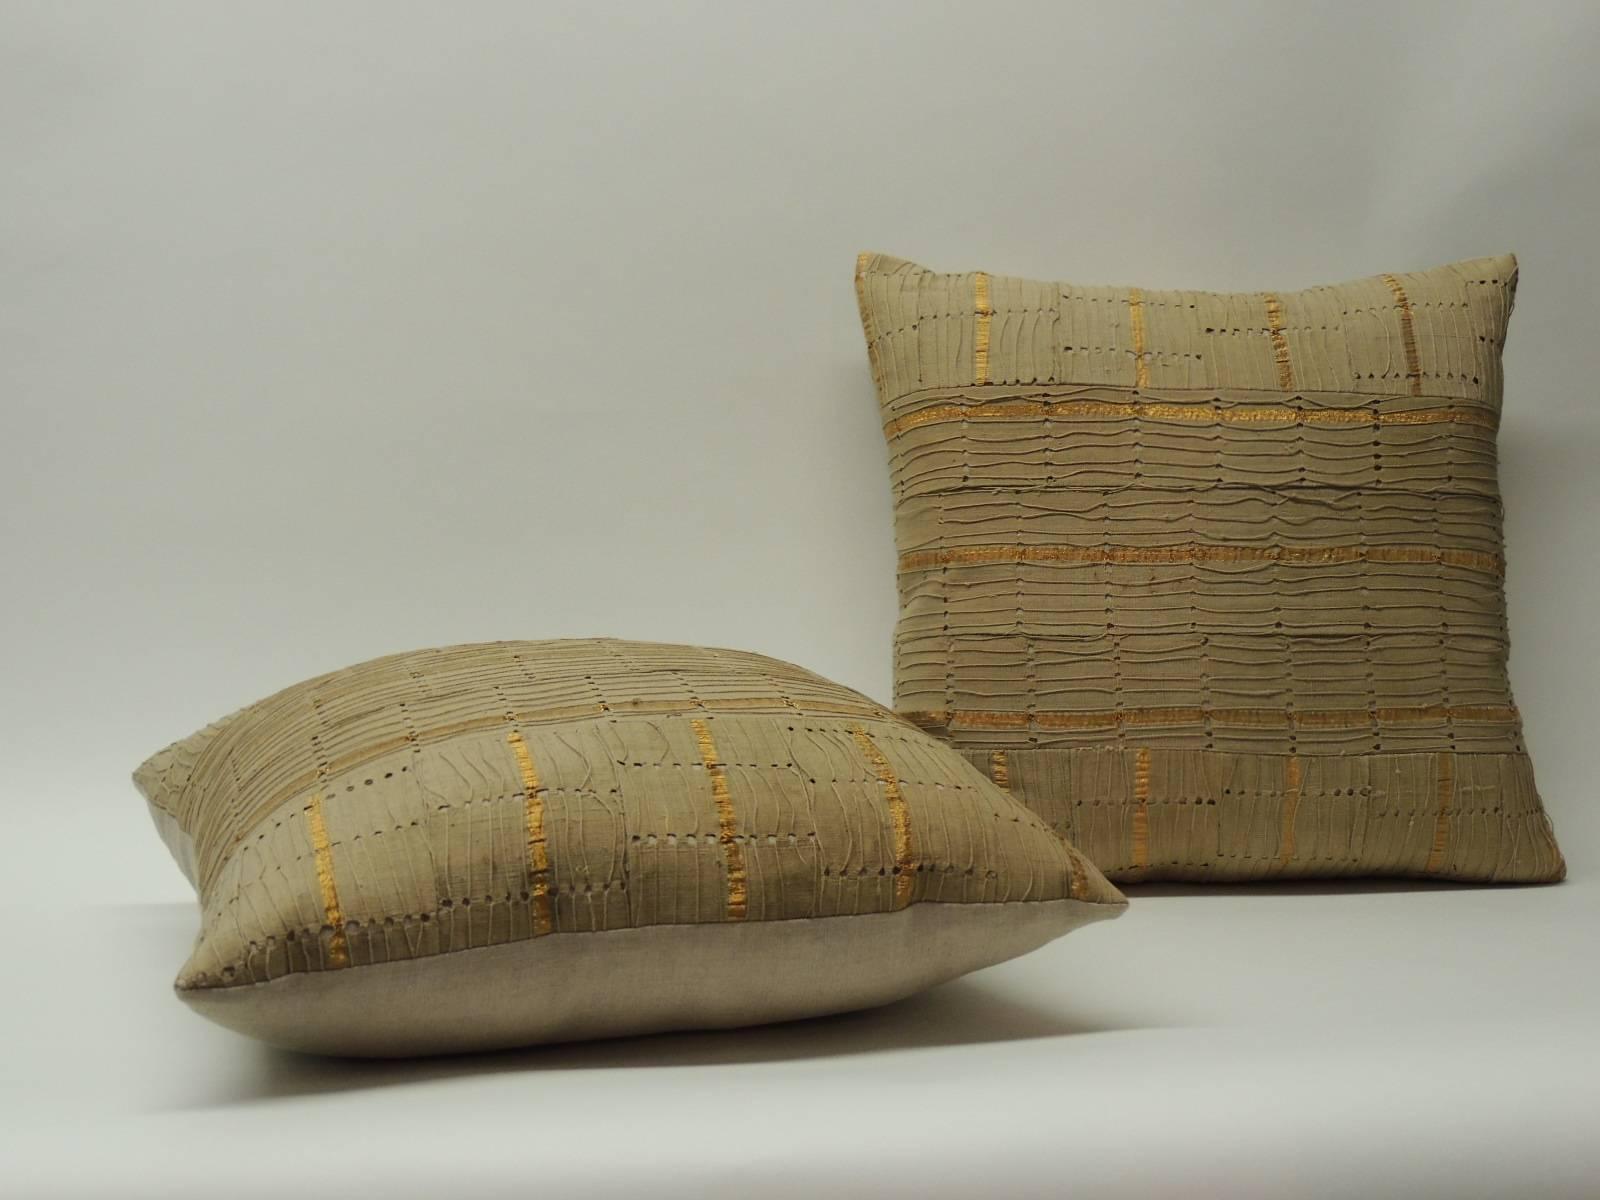 Tribal Pair of African Gold and Tan Decorative Pillows